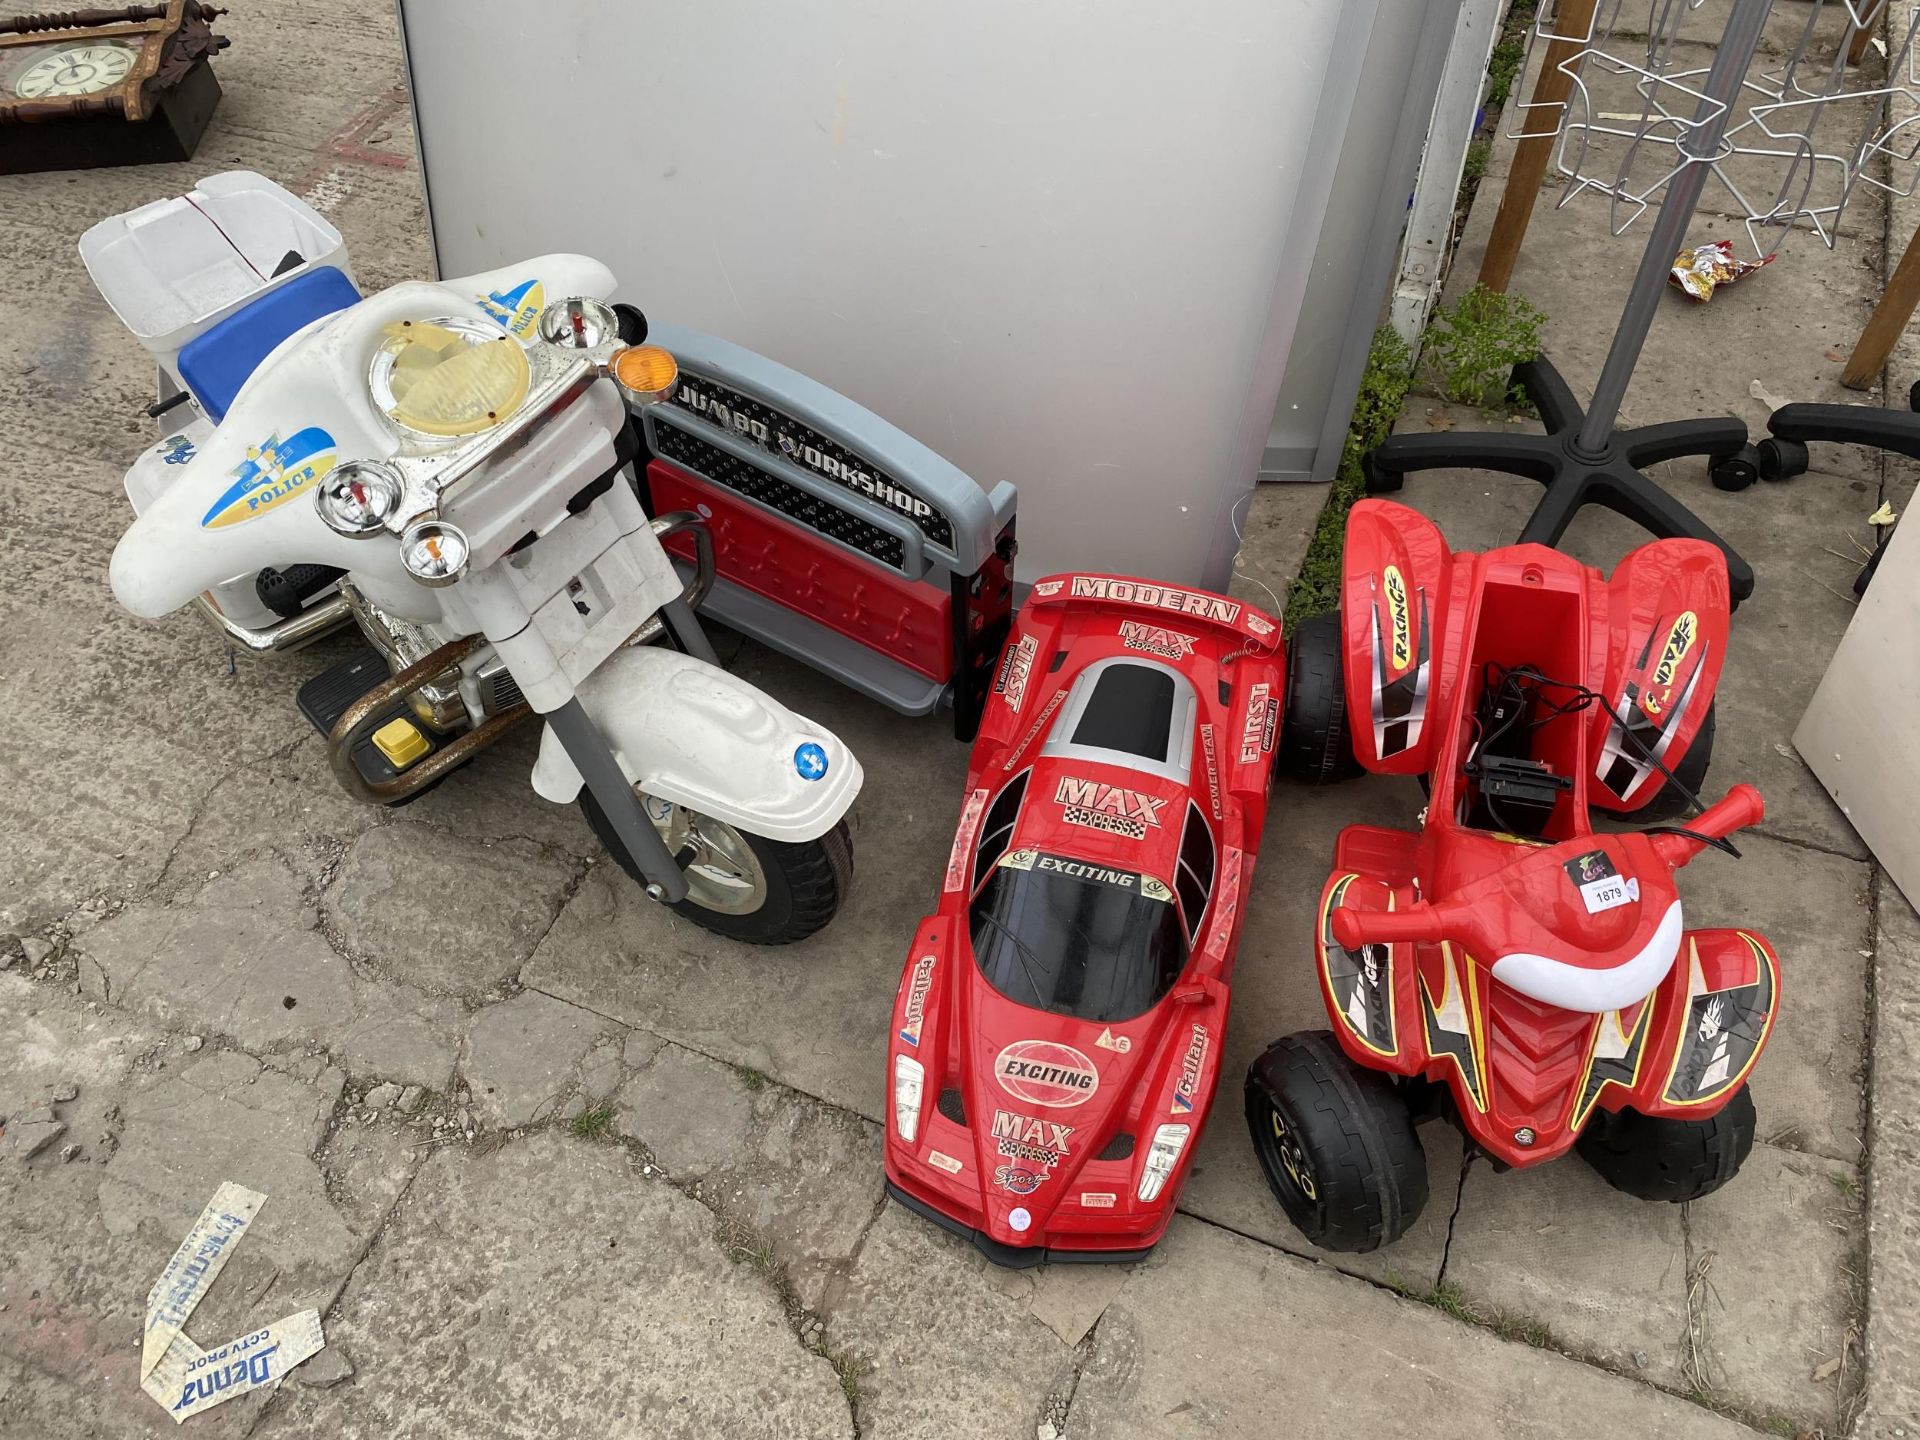 CHILDREN'S TOYS - A QUAD, RACING CAR, MOTORCYCLE AND WORKSHOP